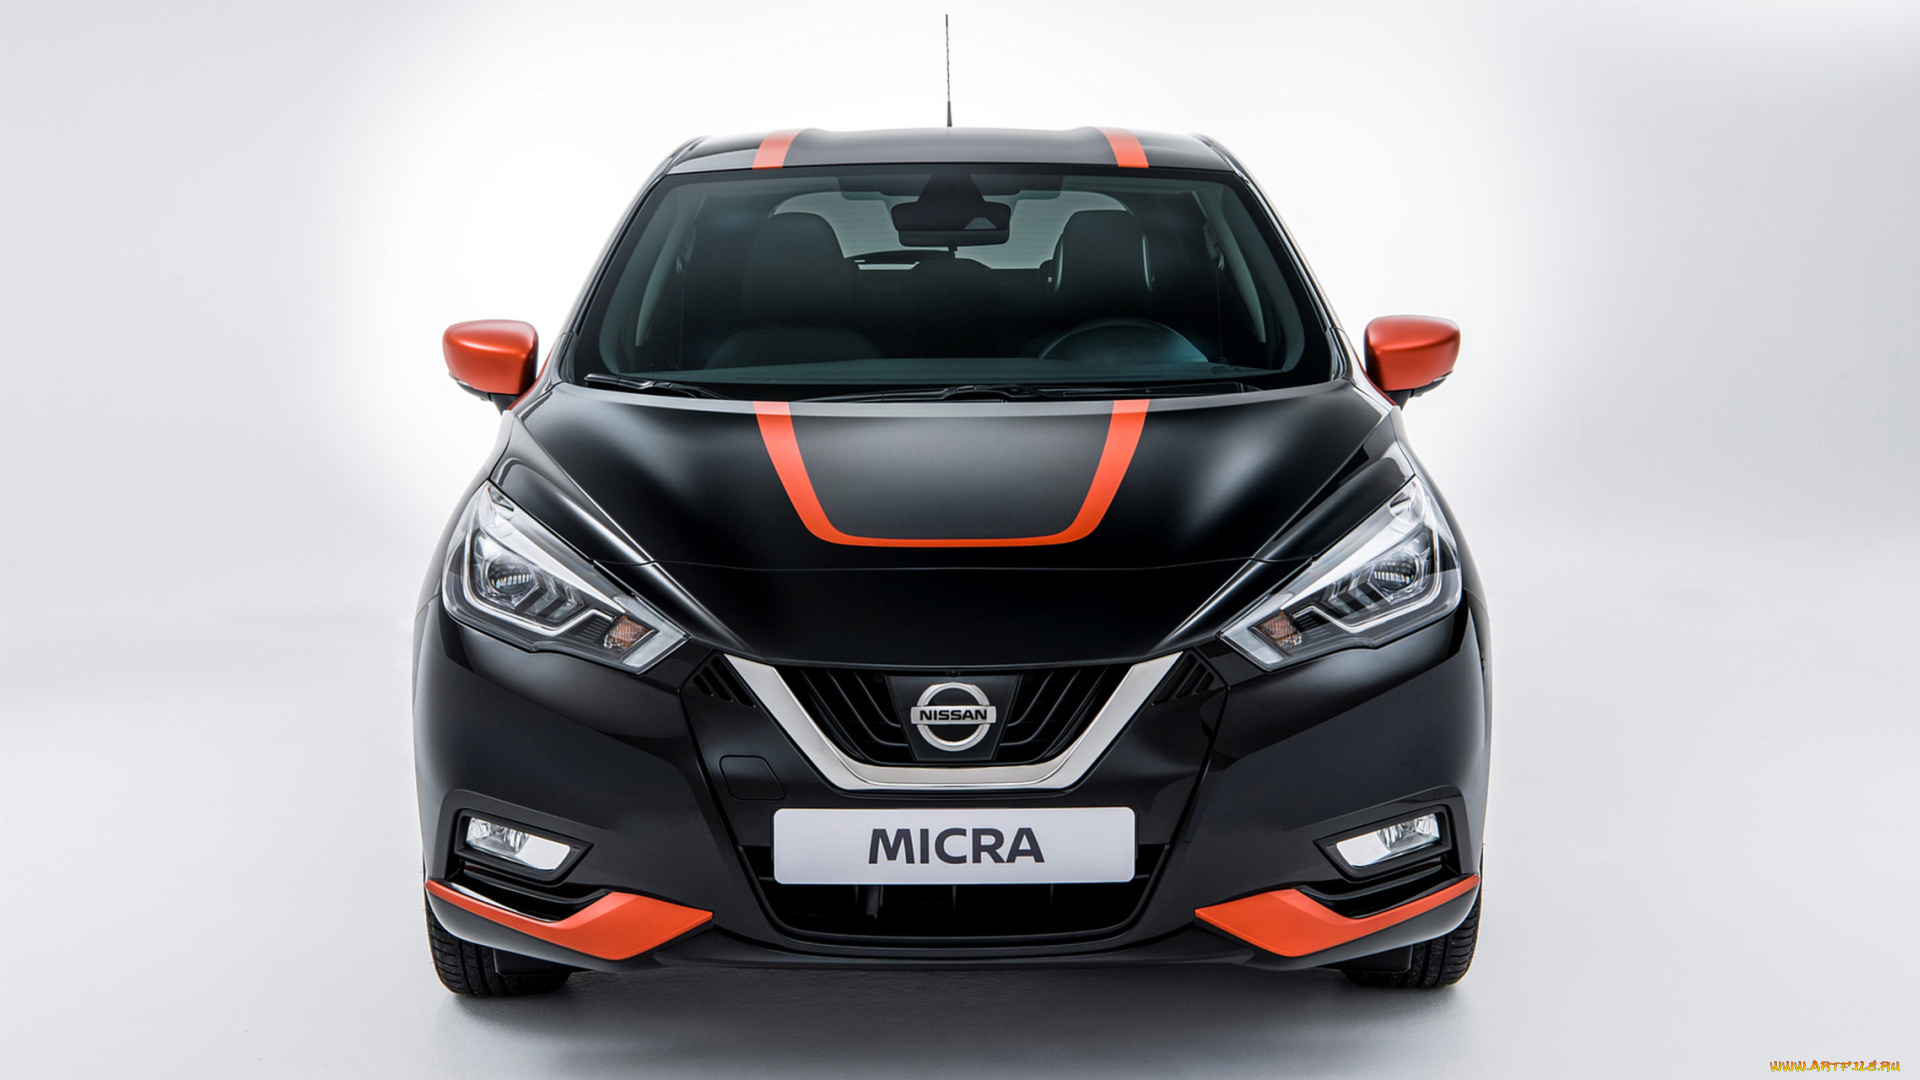 nissan, micra, bose, personal, edition, 2017, автомобили, nissan, datsun, 2017, edition, personal, bose, micra